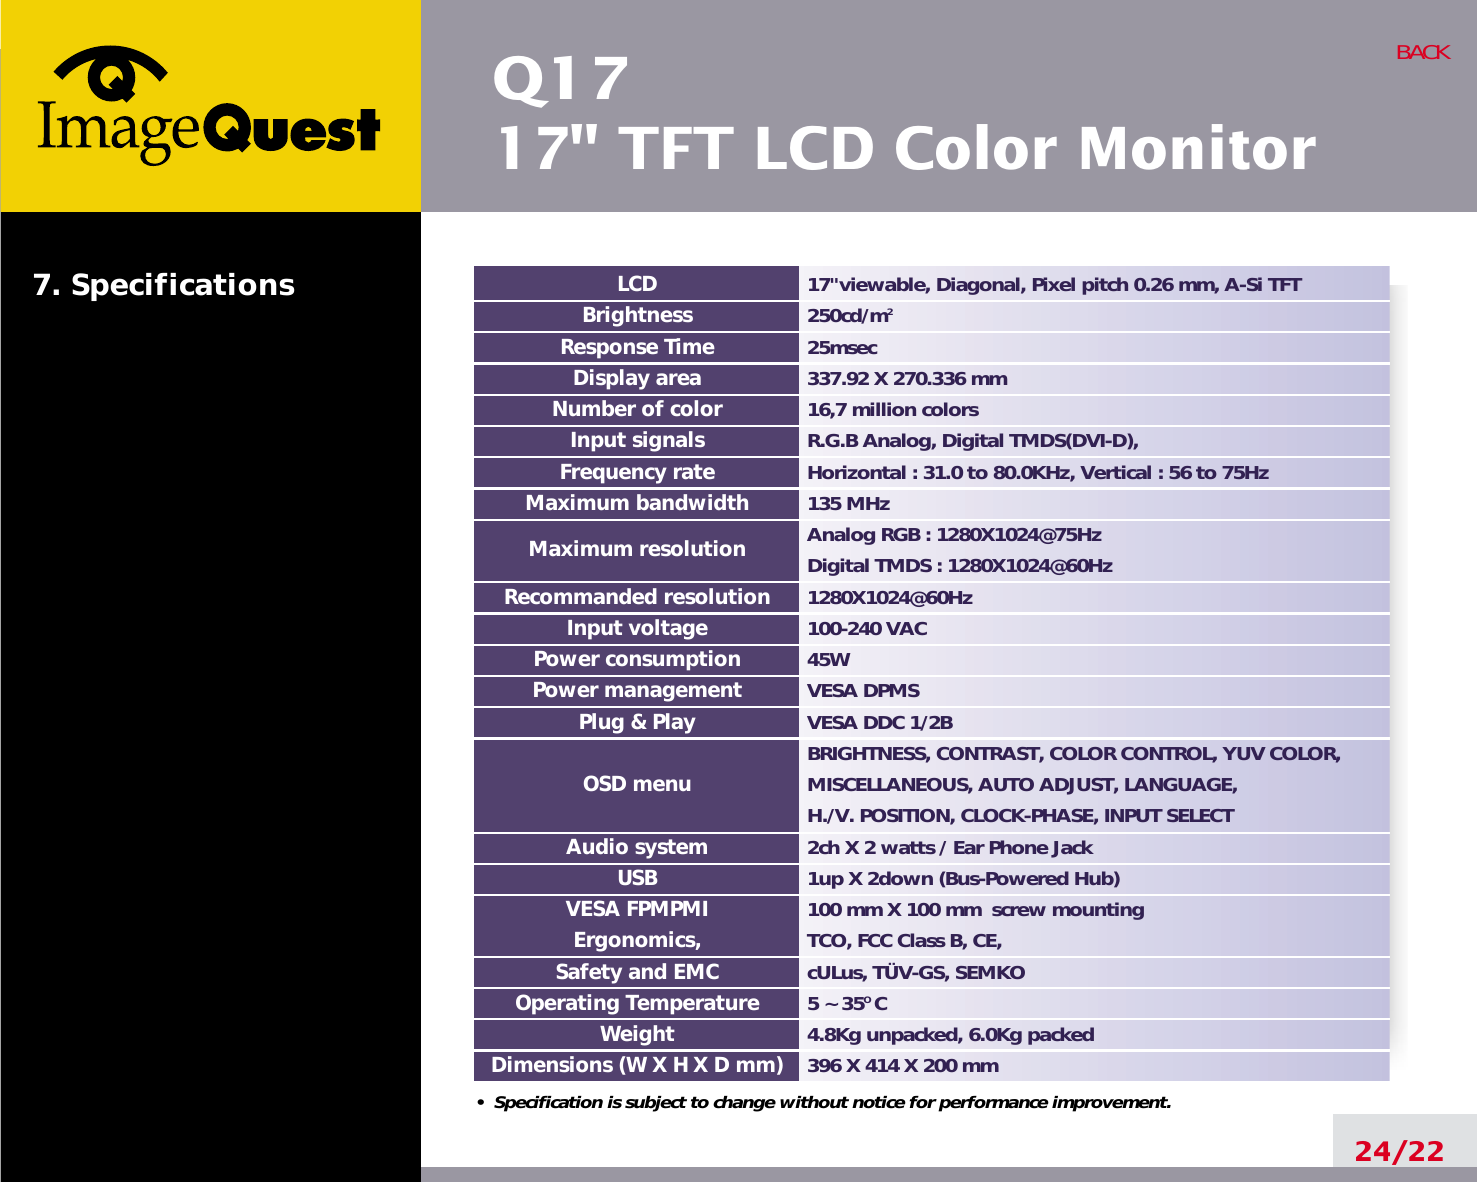 Q1717&quot; TFT LCD Color Monitor24/22BACK17&quot;viewable, Diagonal, Pixel pitch 0.26 mm, A-Si TFT250cd/m225msec337.92 X 270.336 mm16,7 million colorsR.G.B Analog, Digital TMDS(DVI-D),Horizontal : 31.0 to 80.0KHz, Vertical : 56 to 75Hz135 MHzAnalog RGB : 1280X1024@75HzDigital TMDS : 1280X1024@60Hz1280X1024@60Hz100-240 VAC45WVESA DPMSVESA DDC 1/2BBRIGHTNESS, CONTRAST, COLOR CONTROL, YUV COLOR, MISCELLANEOUS, AUTO ADJUST, LANGUAGE, H./V. POSITION, CLOCK-PHASE, INPUT SELECT2ch X 2 watts / Ear Phone Jack1up X 2down (Bus-Powered Hub)100 mm X 100 mm  screw mountingTCO, FCC Class B, CE,cULus, TÜV-GS, SEMKO5 ~ 35O C4.8Kg unpacked, 6.0Kg packed396 X 414 X 200 mmLCDBrightnessResponse TimeDisplay areaNumber of colorInput signalsFrequency rateMaximum bandwidthMaximum resolutionRecommanded resolutionInput voltagePower consumptionPower managementPlug &amp; PlayOSD menuAudio systemUSBVESA FPMPMIErgonomics,Safety and EMCOperating TemperatureWeightDimensions (W X H X D mm)•  Specification is subject to change without notice for performance improvement.7. Specifications